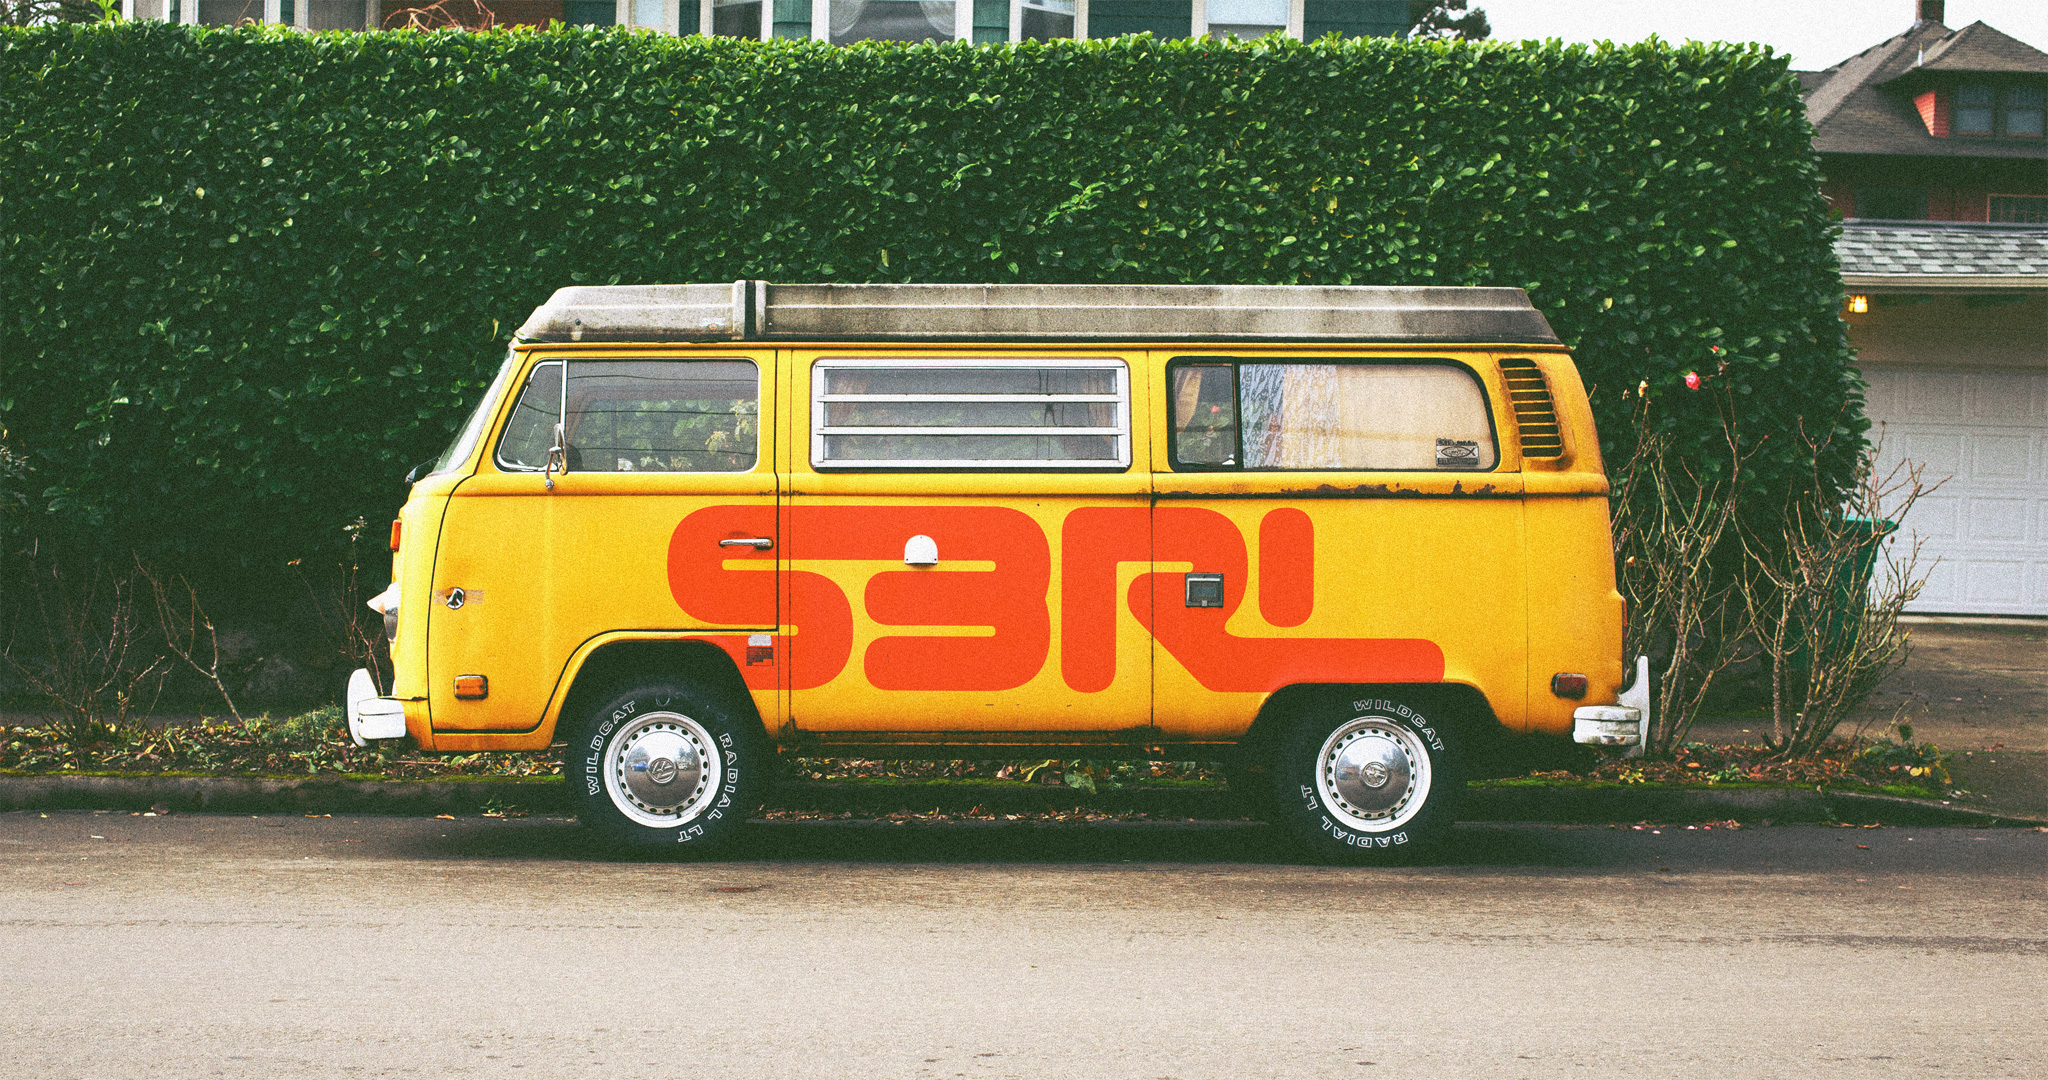 S3RL logotype in red, painted on a yellow van.